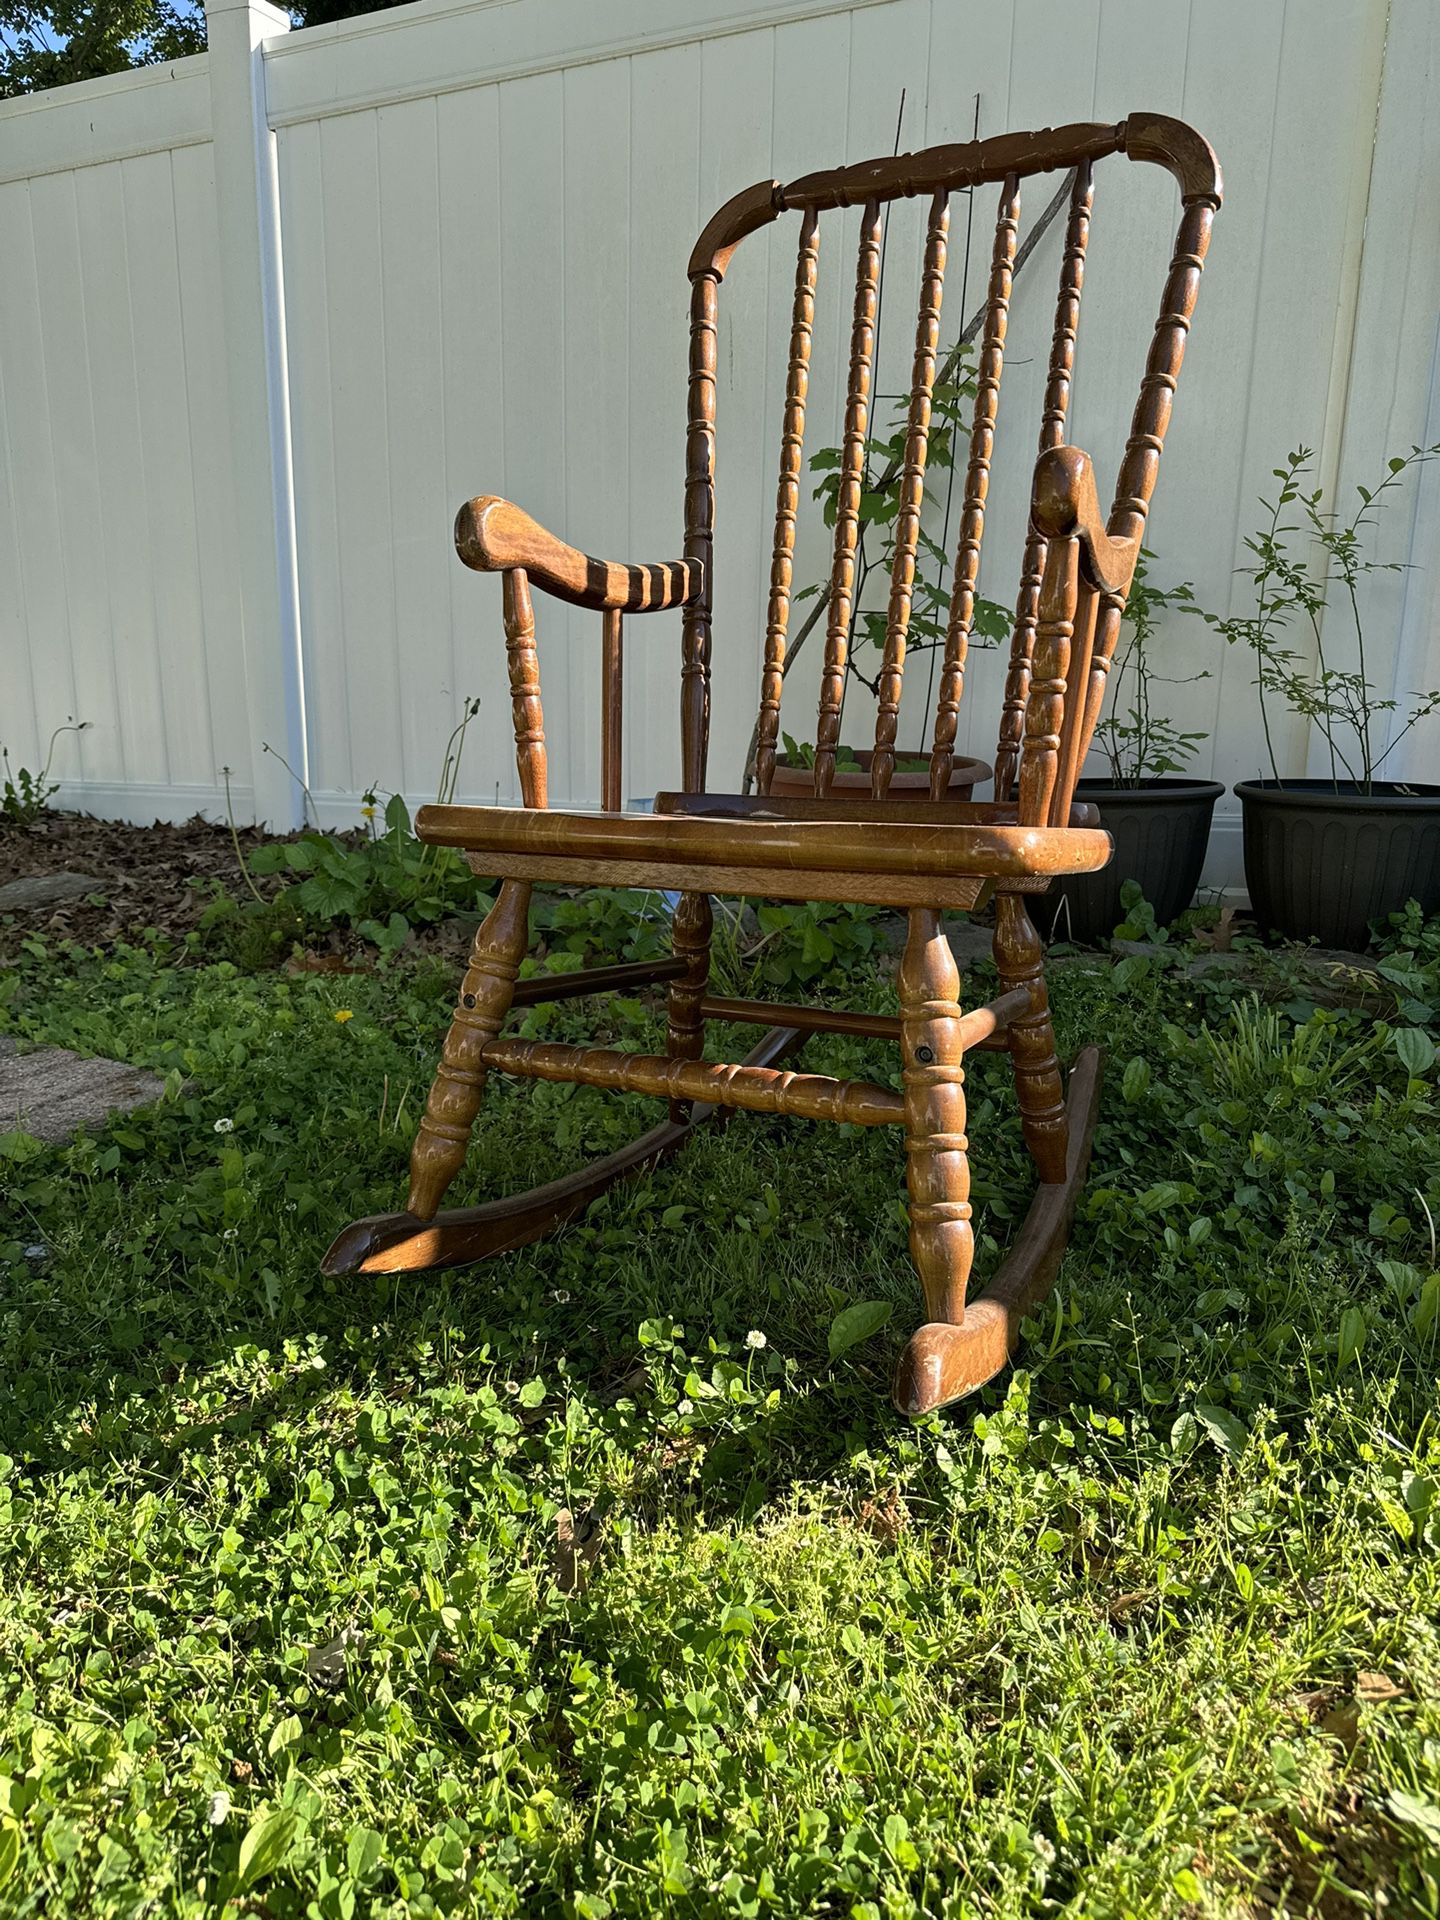 Rocking Chair Great Shape  $30